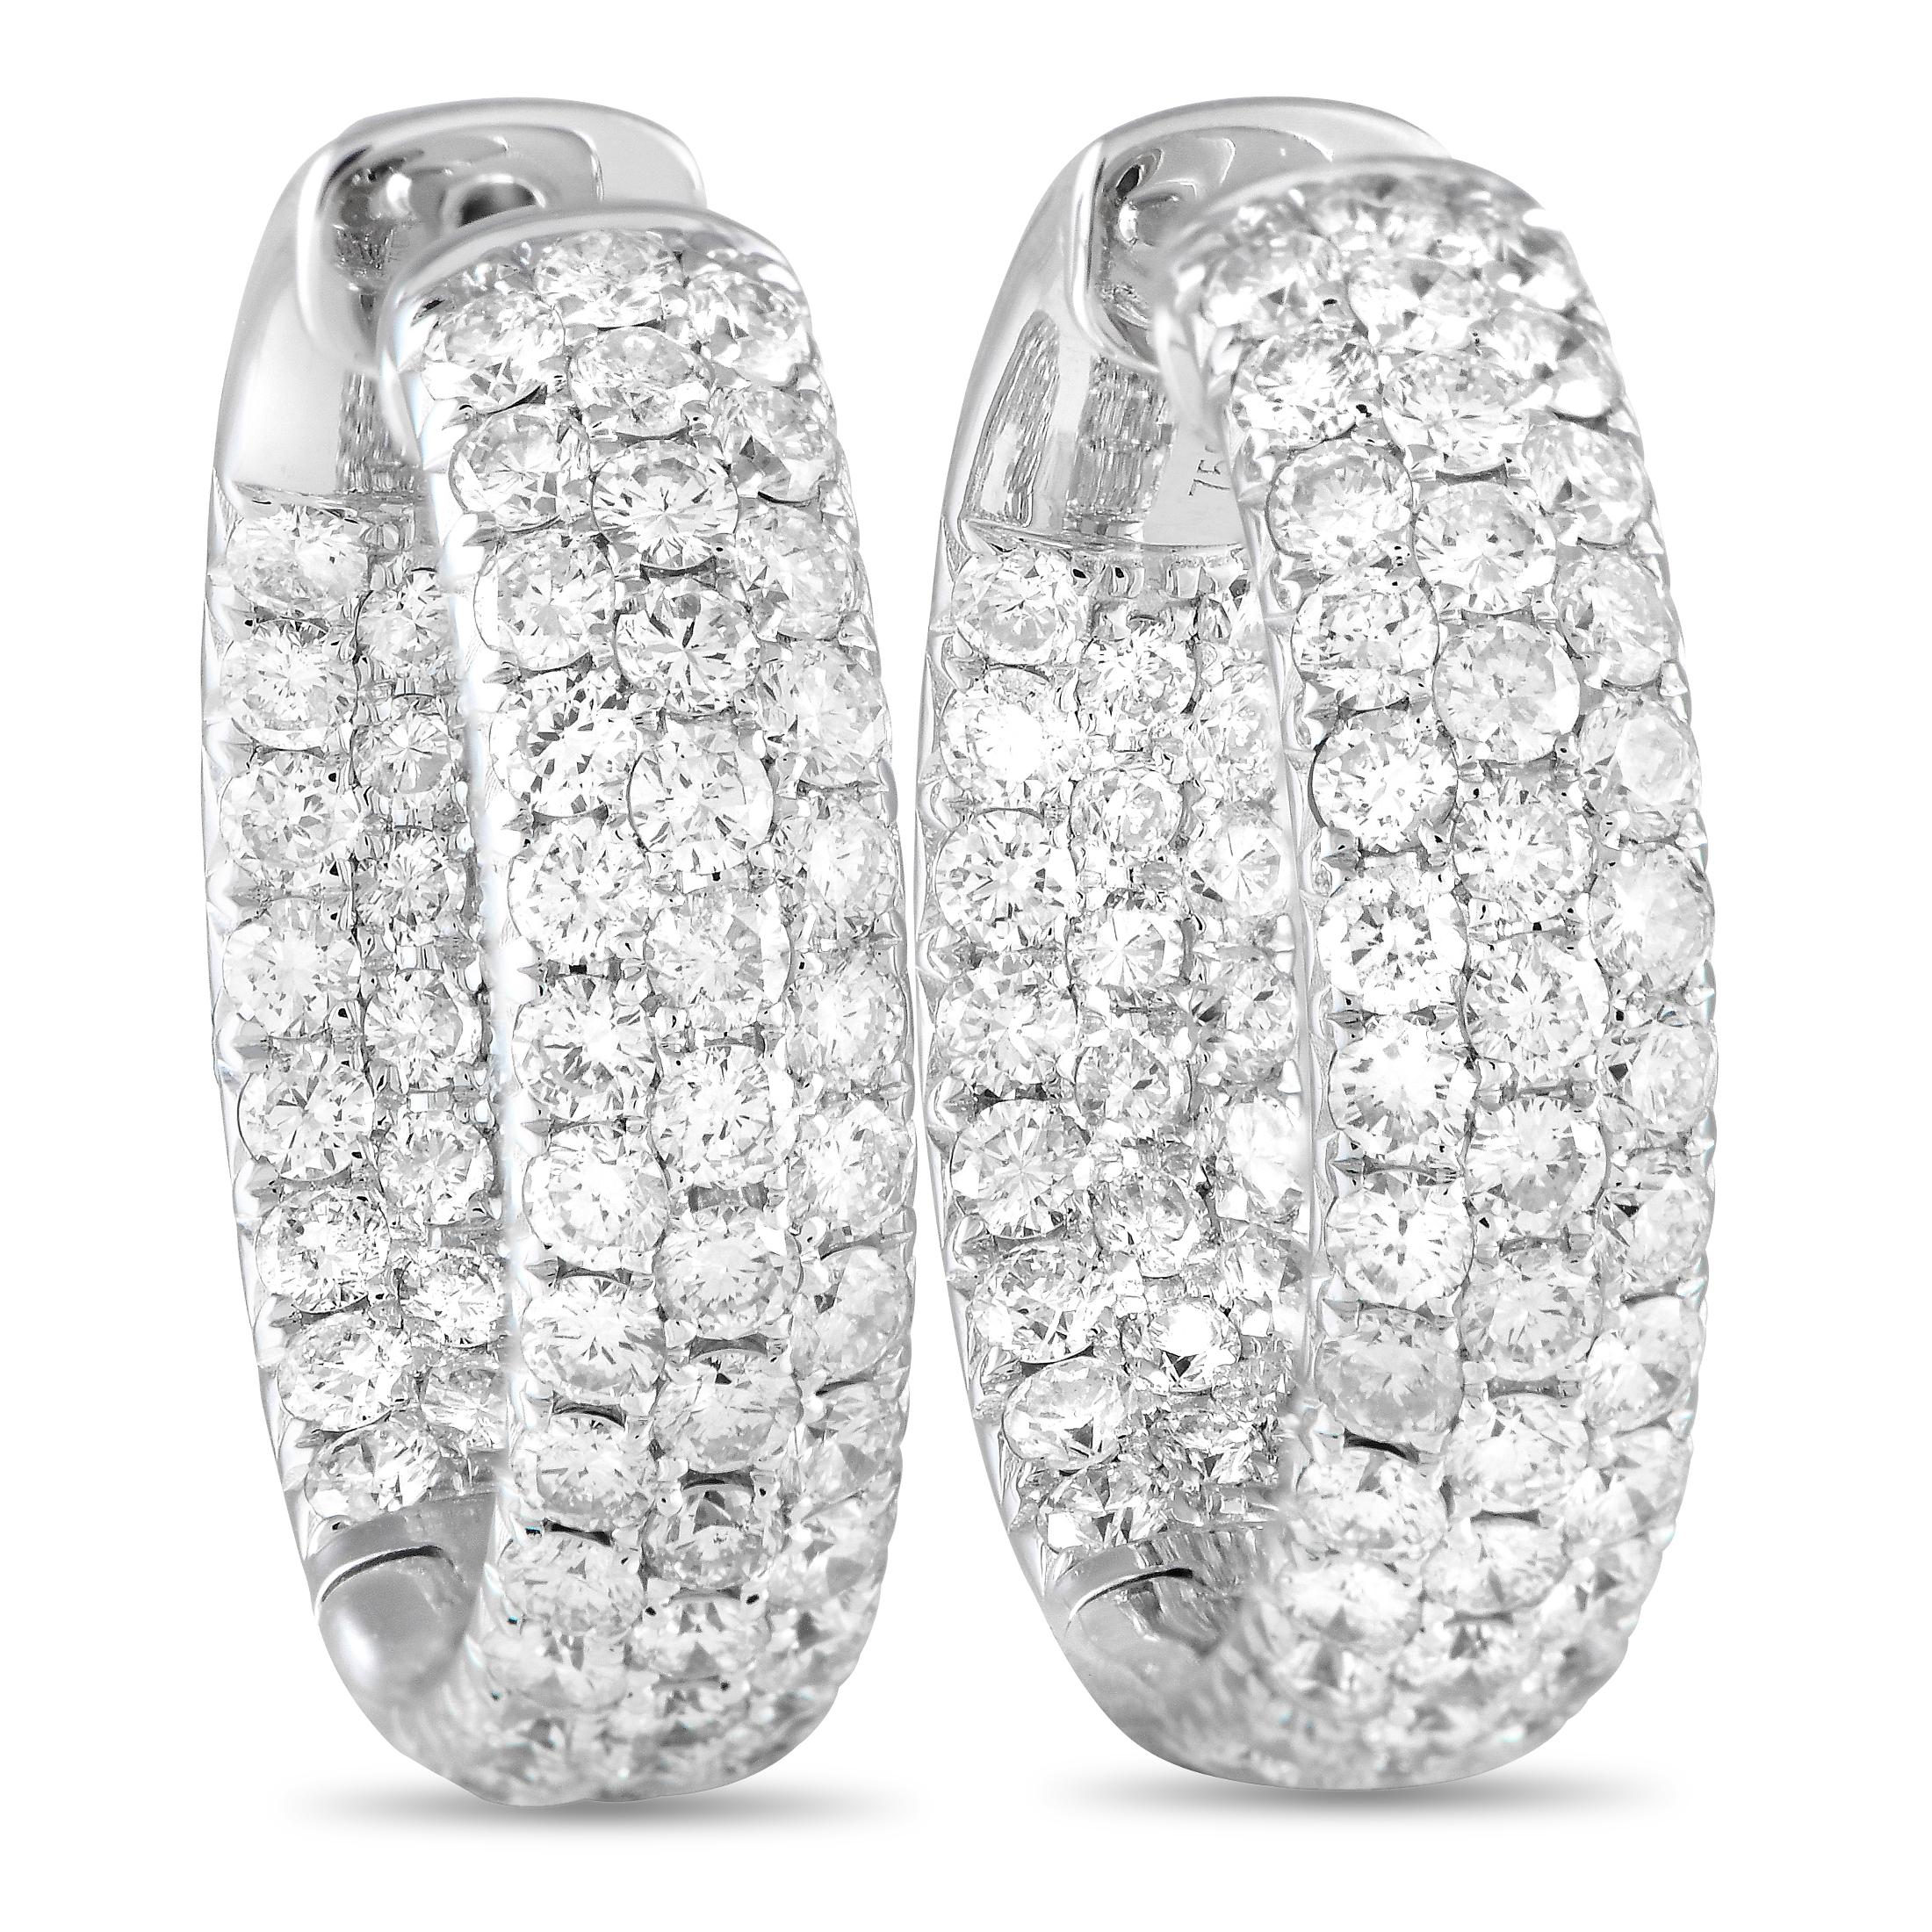 LB Exclusive 18k White Gold 4.15 Carat Diamond Pave Inside-Out Hoop Earrings In New Condition For Sale In Southampton, PA